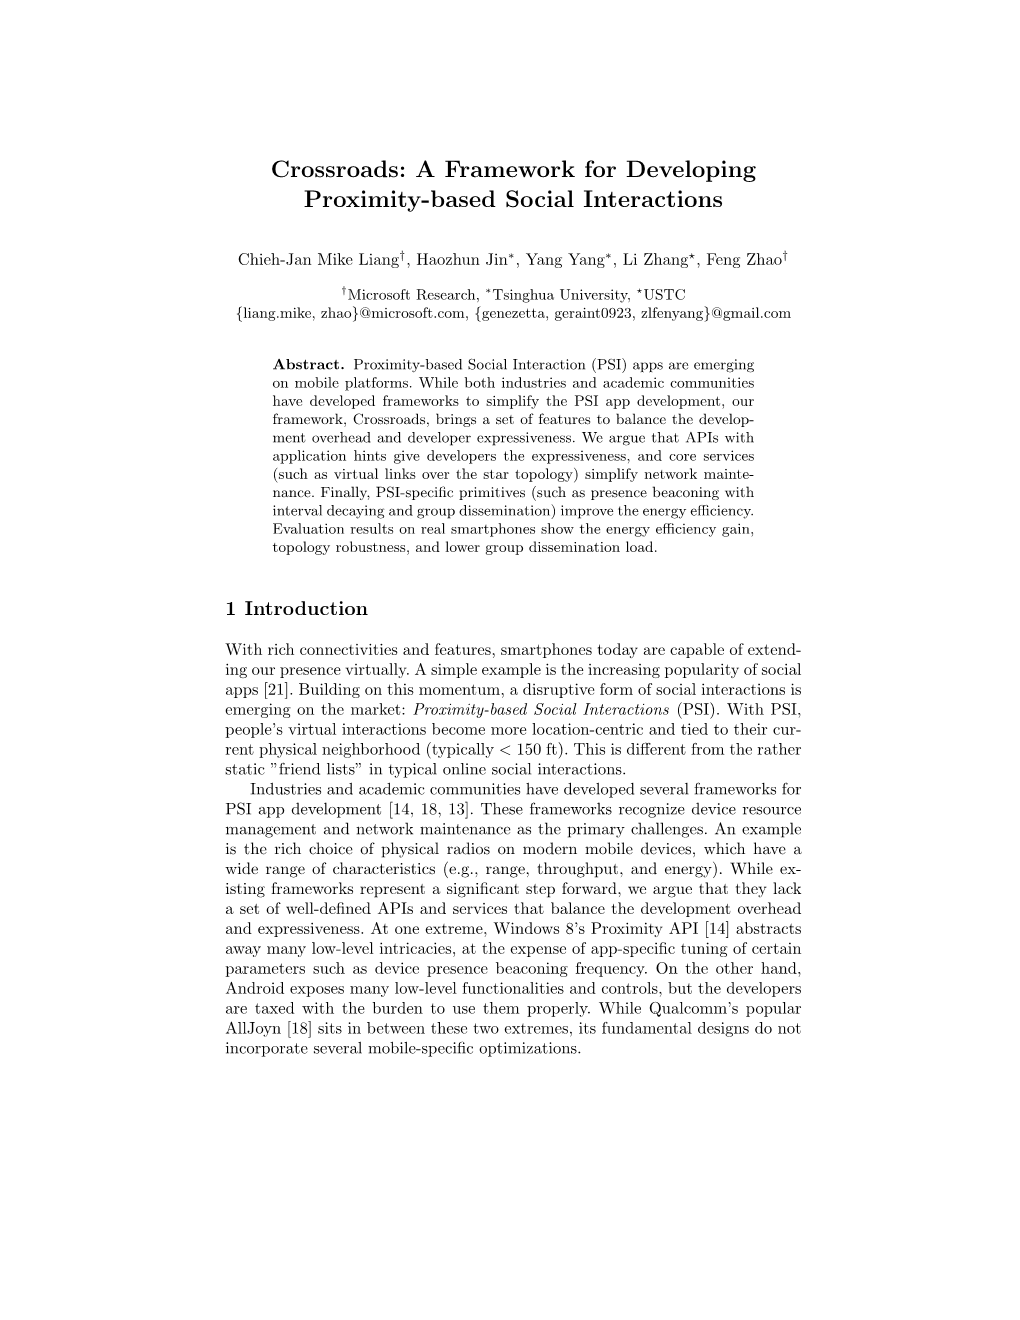 Crossroads: a Framework for Developing Proximity-Based Social Interactions